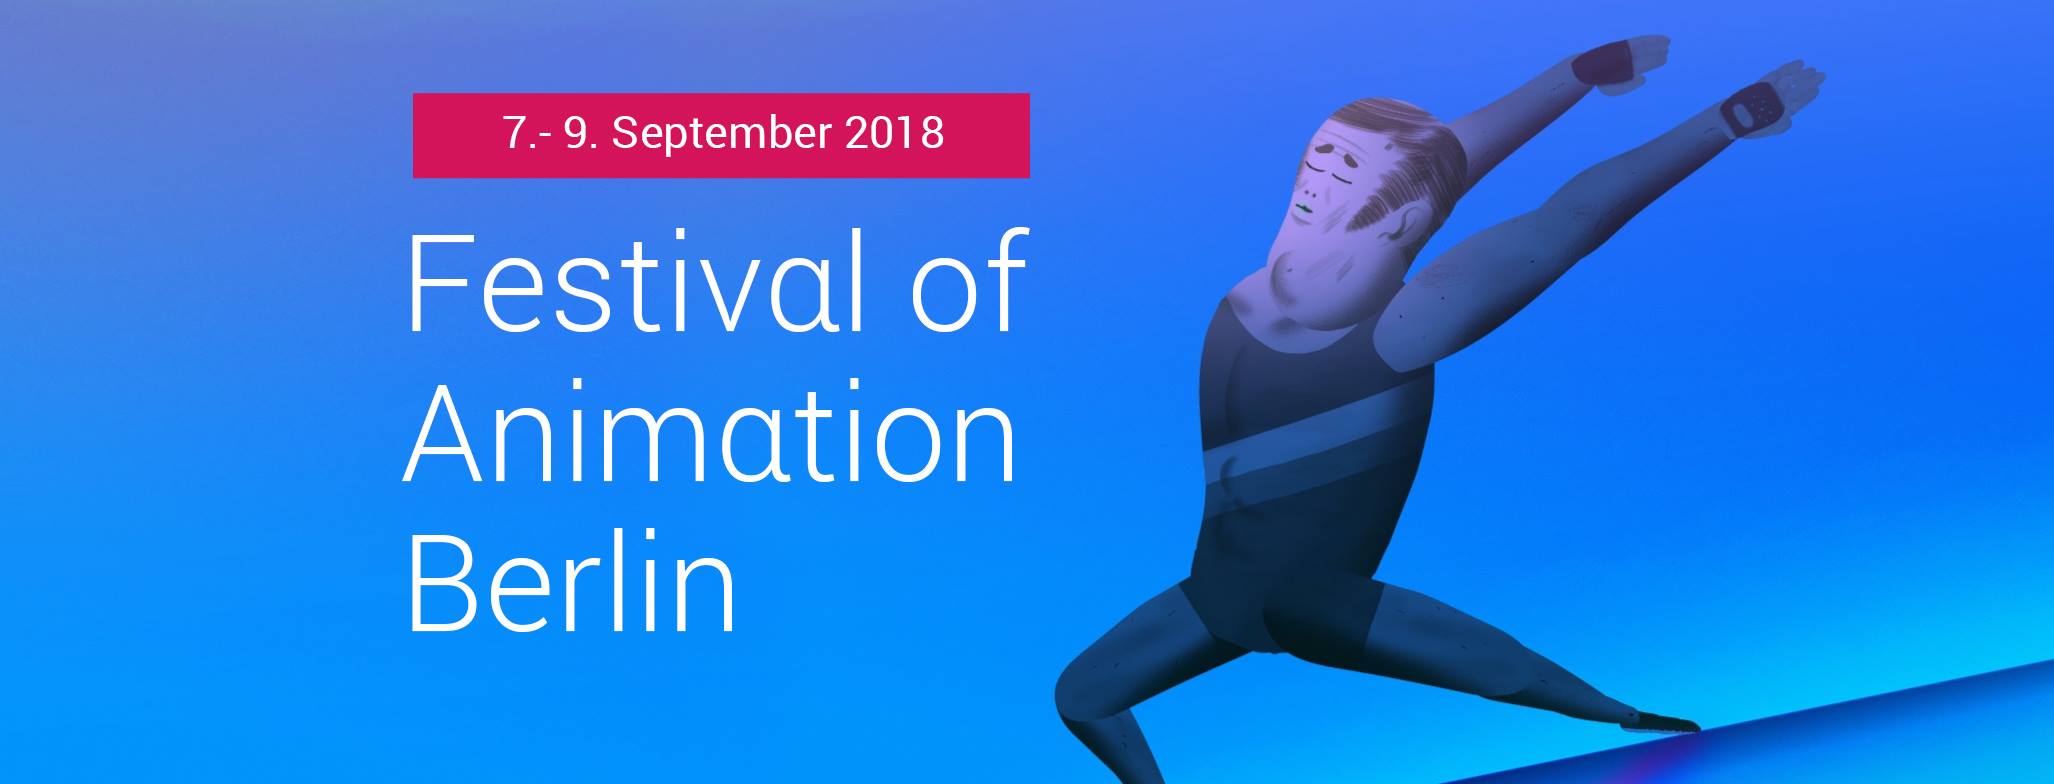 Festival of Animation